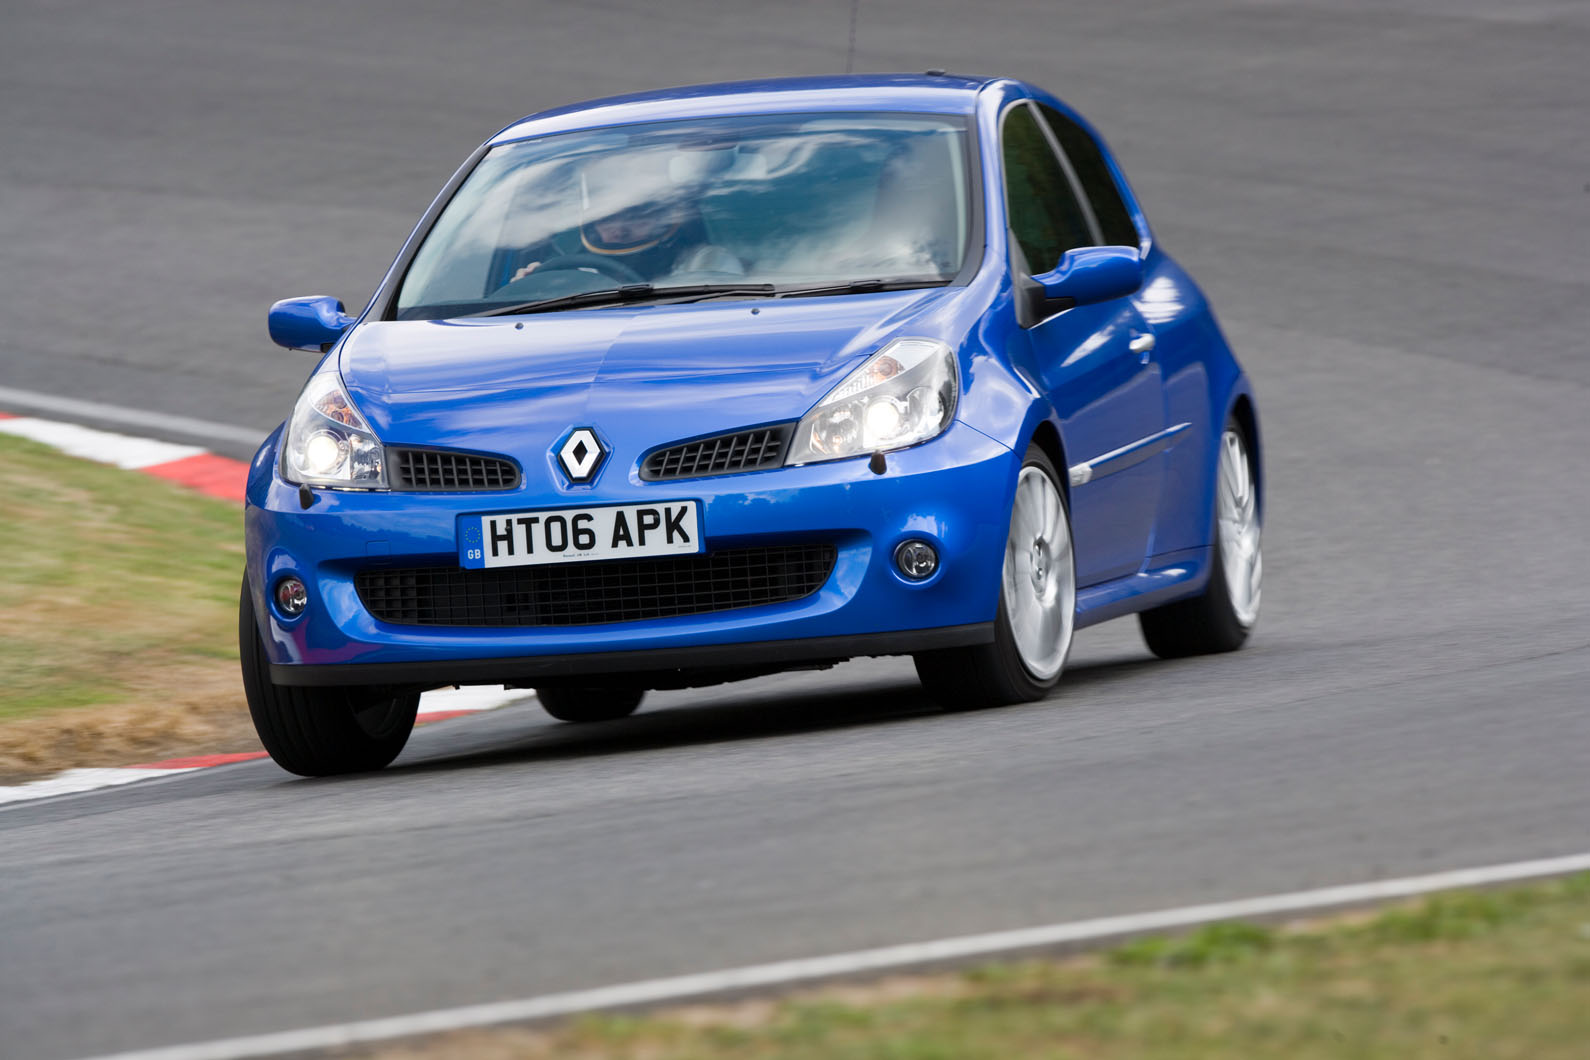 Used car buying guide: Renaultsport Clio 197 | Autocar